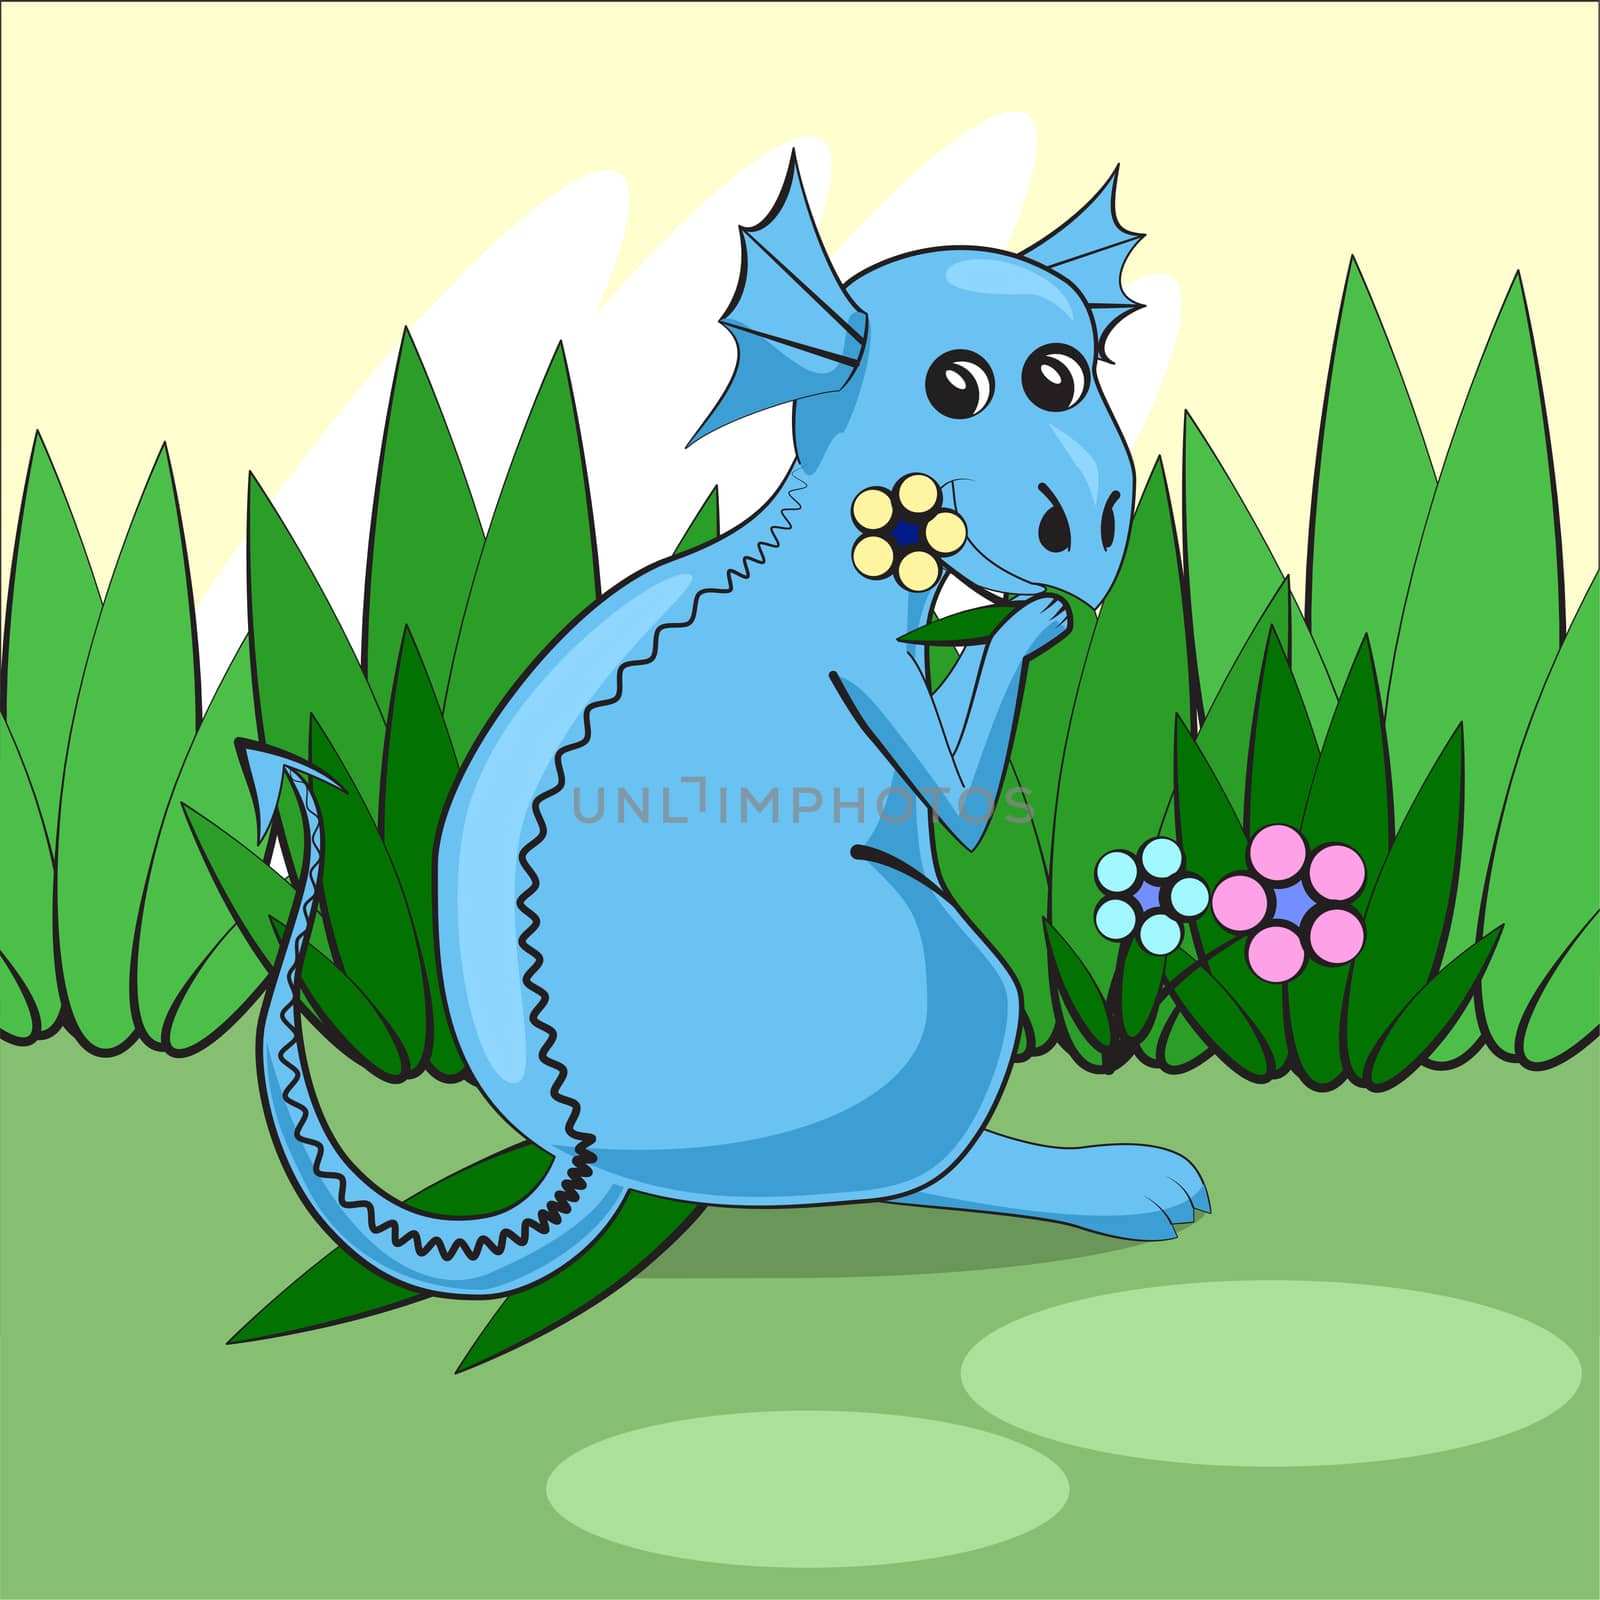 Cute dragon sitting on a green meadow with flowers and eats grass. by Adamchuk